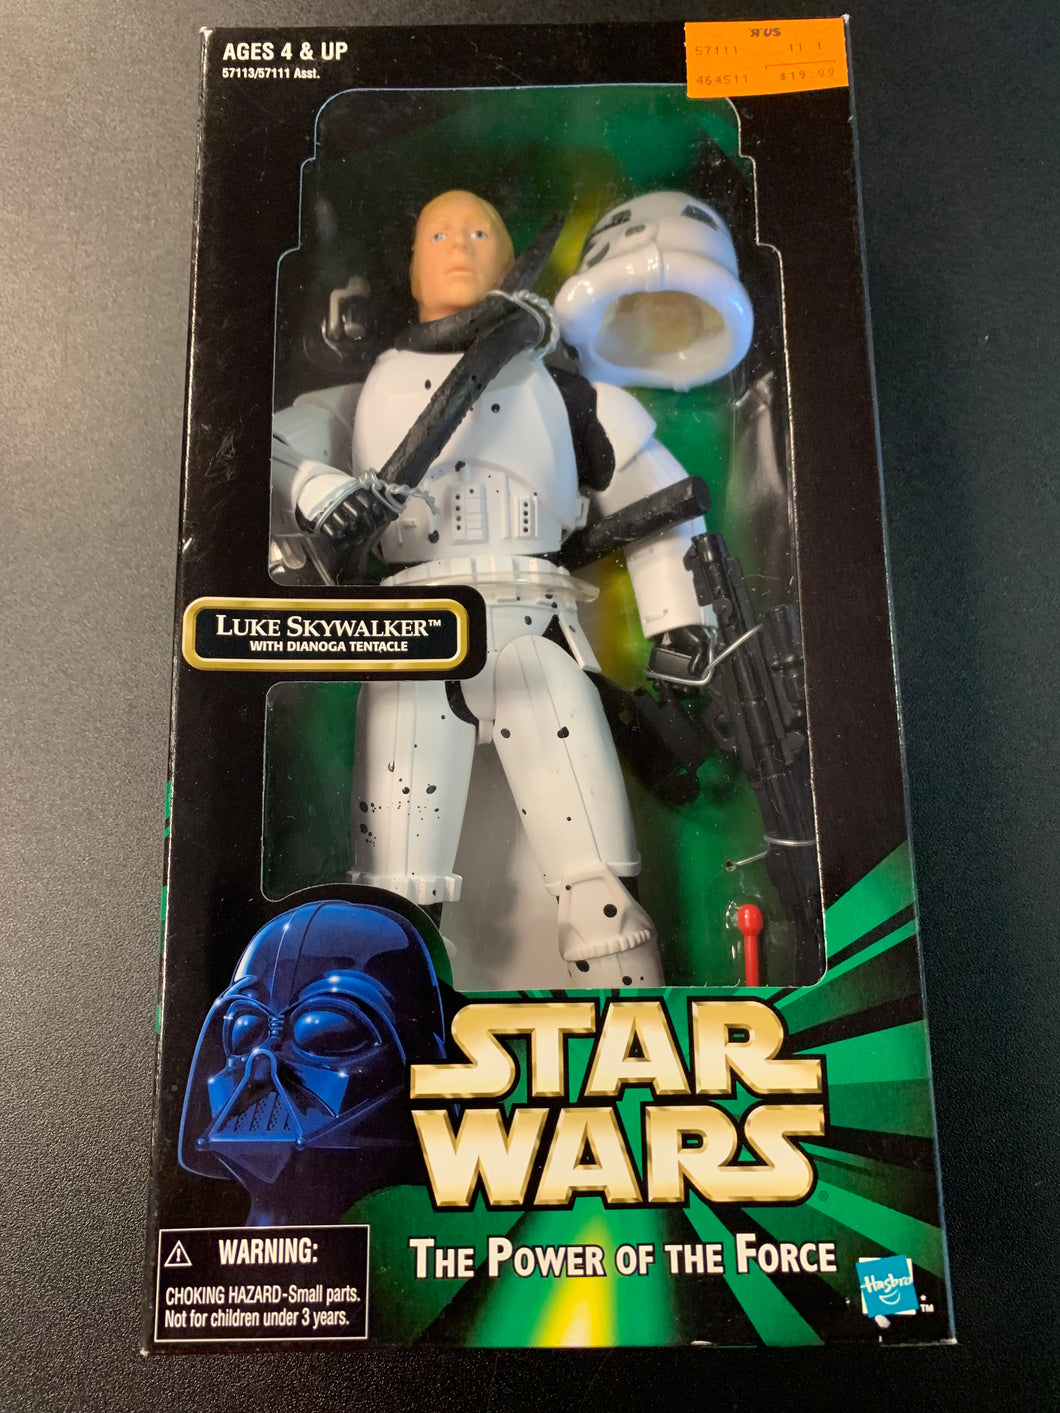 HASBRO STAR WARS THE POWER OF THE FORCE LUKE SKYWALKER WITH DIANOGA TENTACLE NEW IN BOX